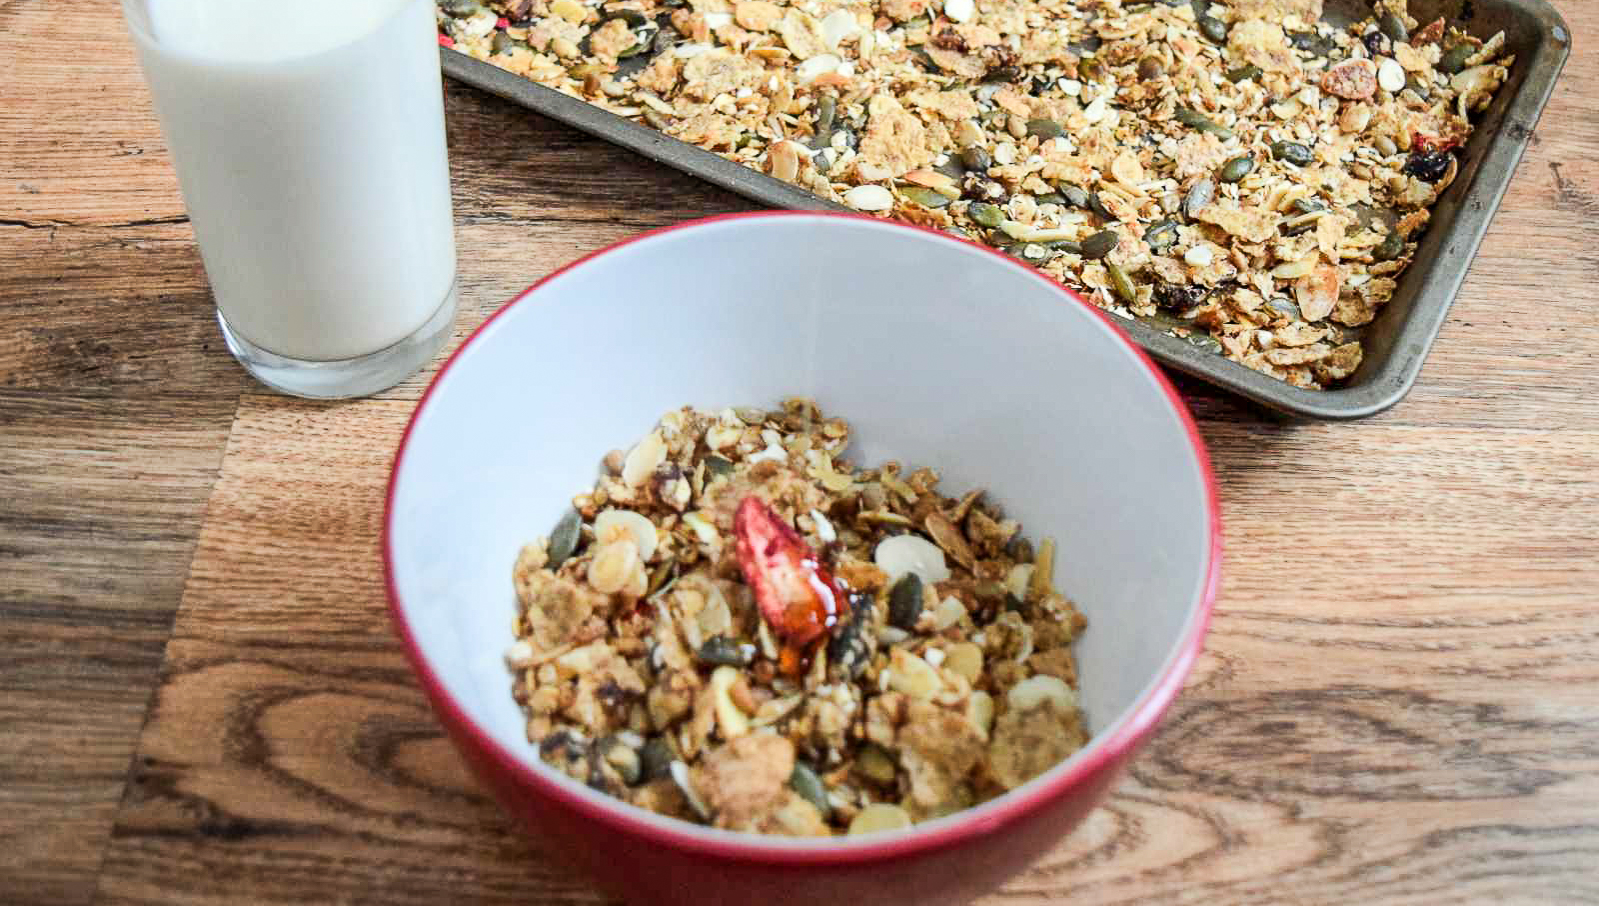 Homemade Granola Mix Recipe with Oats & Wheat Flakes